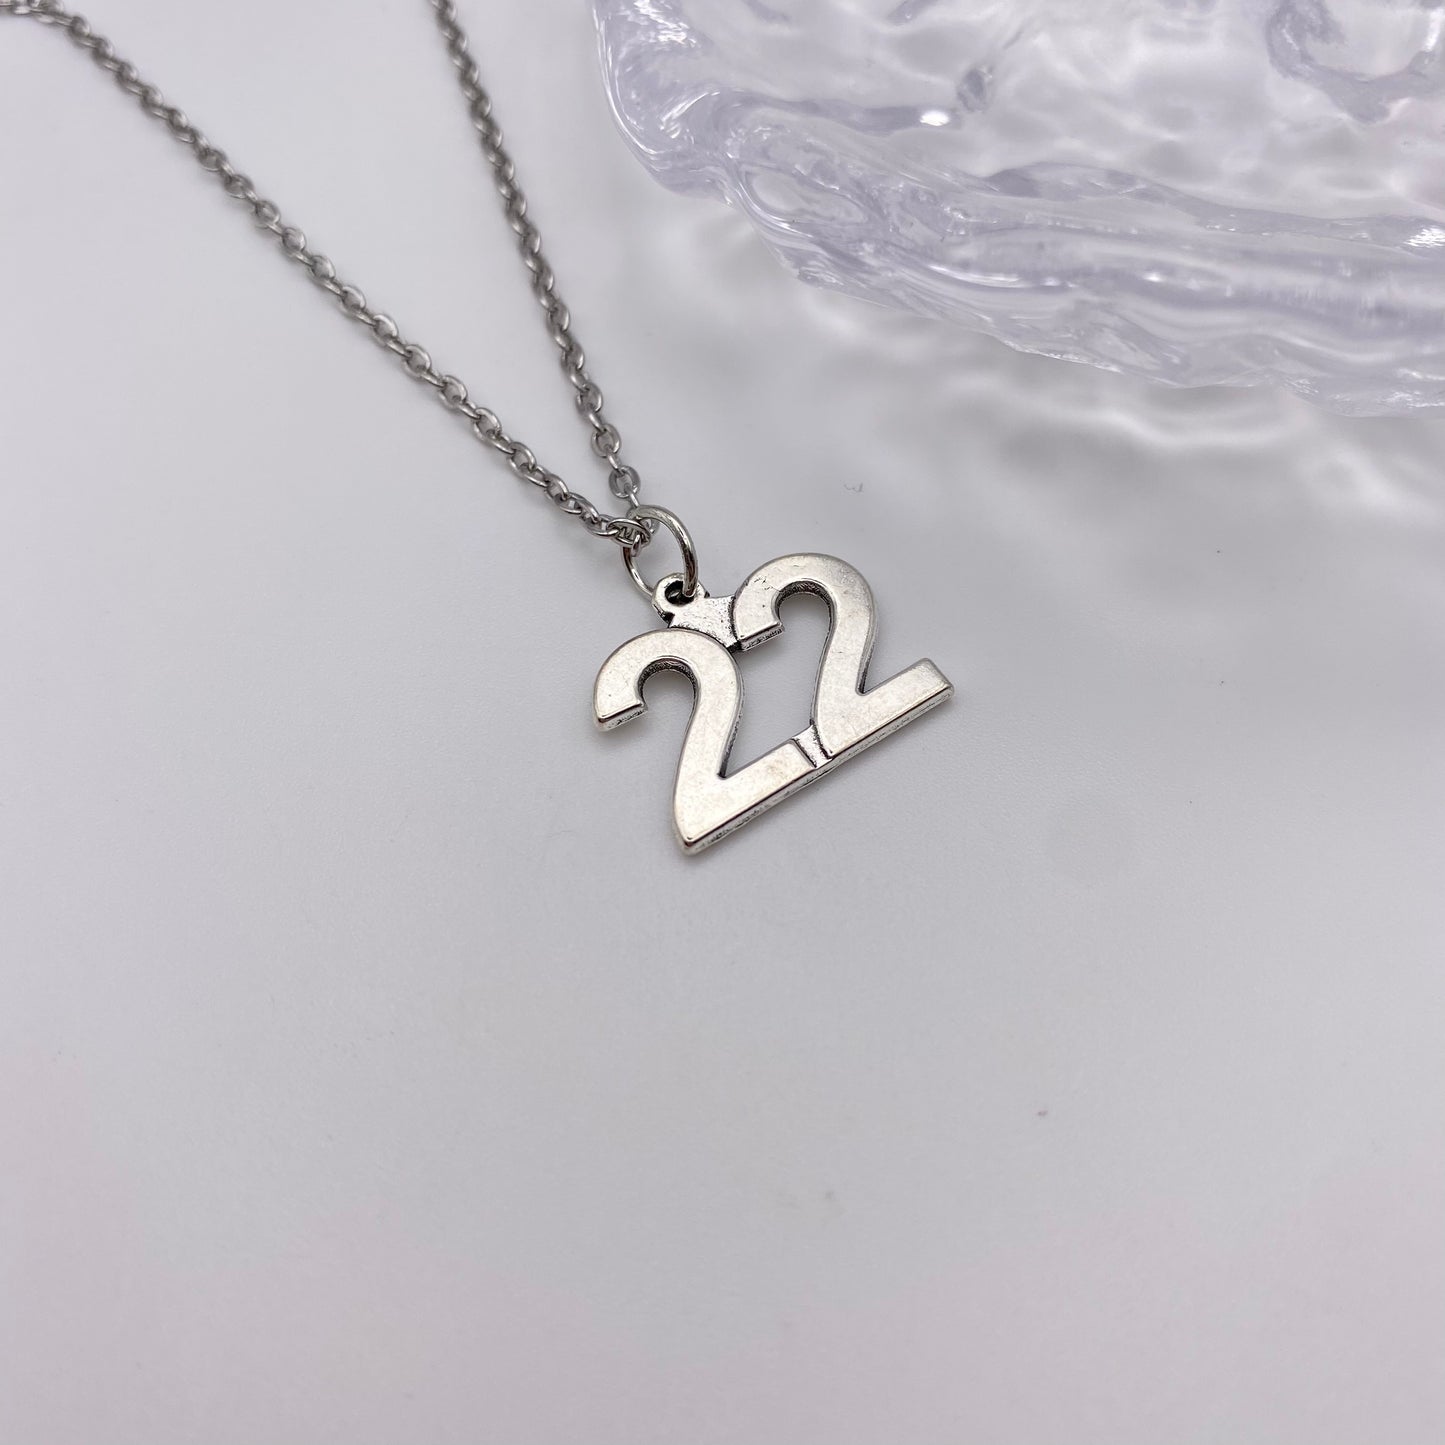 22 Number Necklace